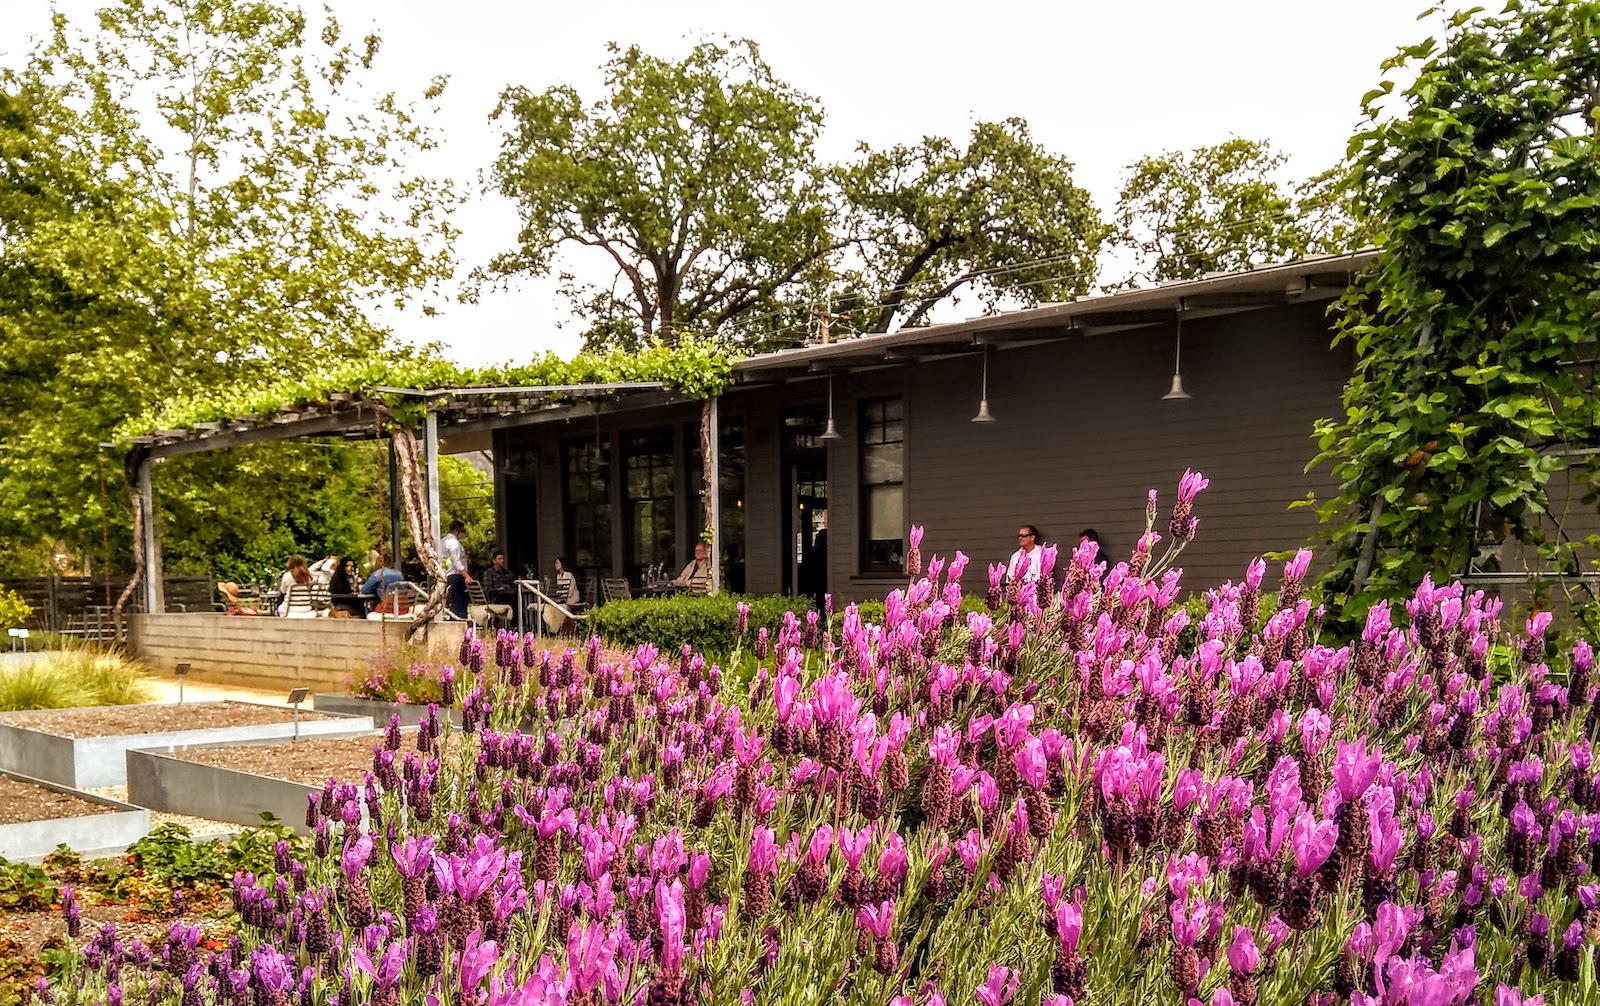 Blooming flowers and an outdoor patio provide the tasting space for Medlock Ames Winery